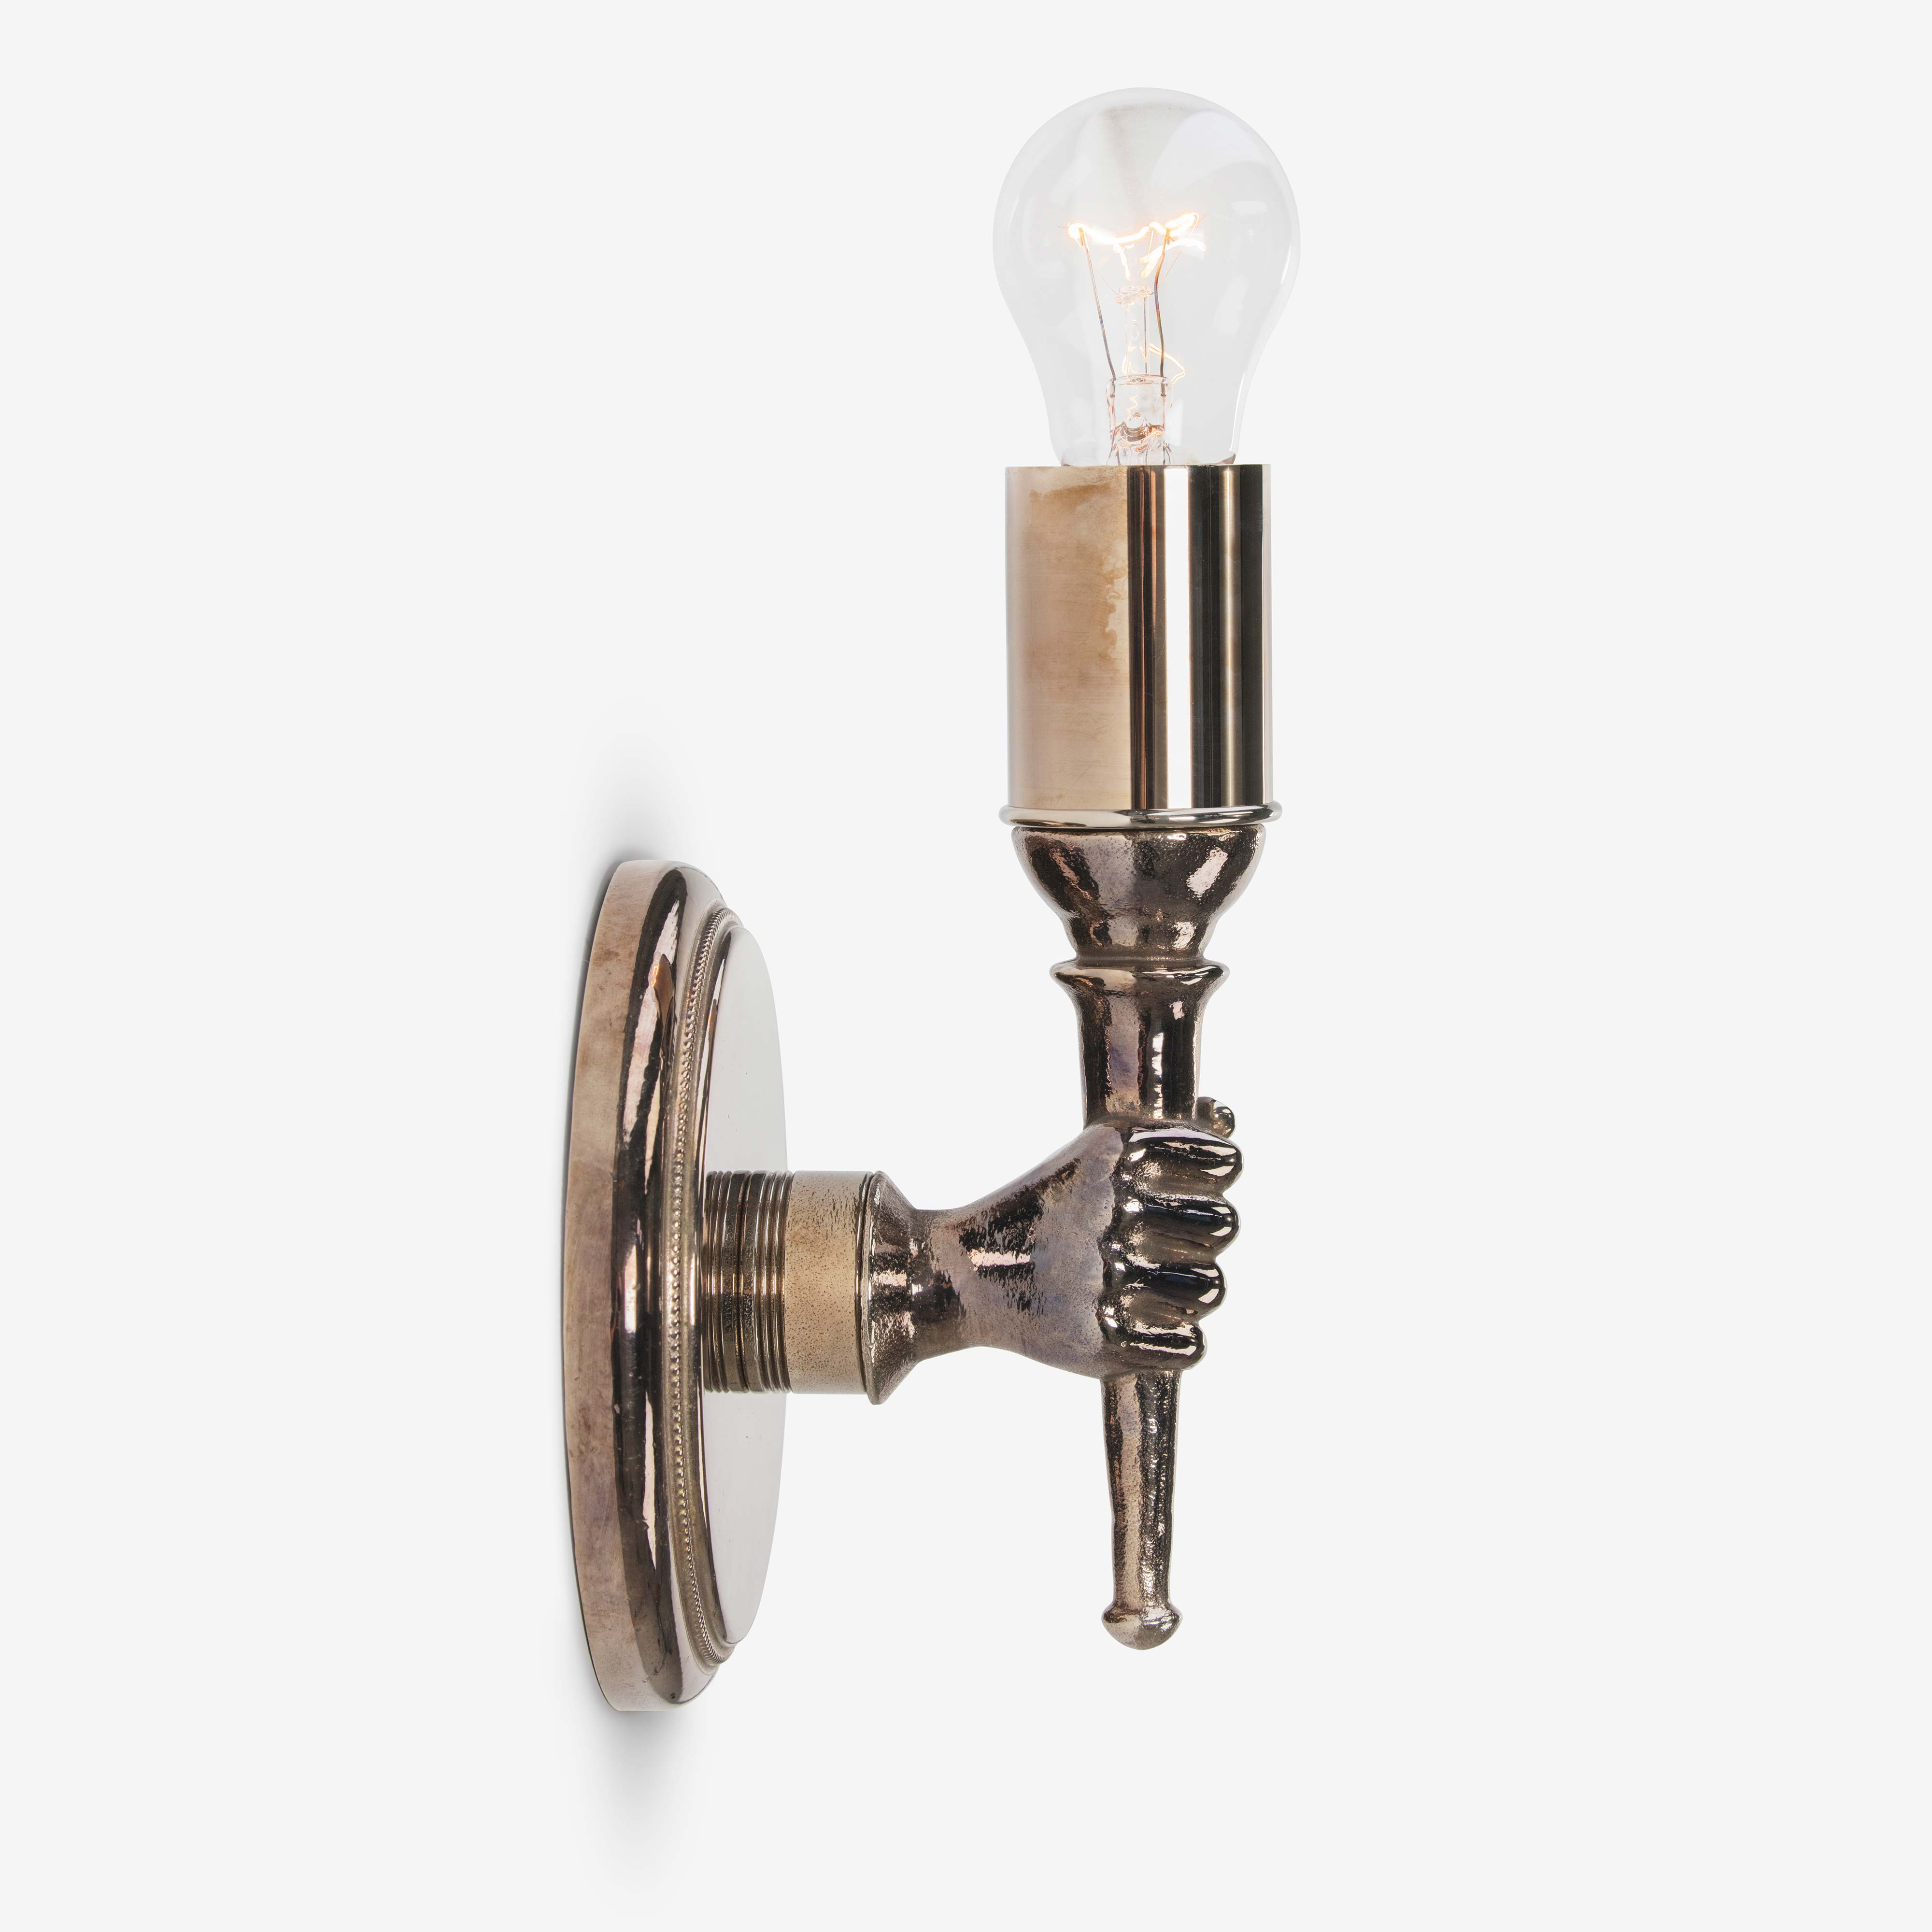 The Hand Sconce